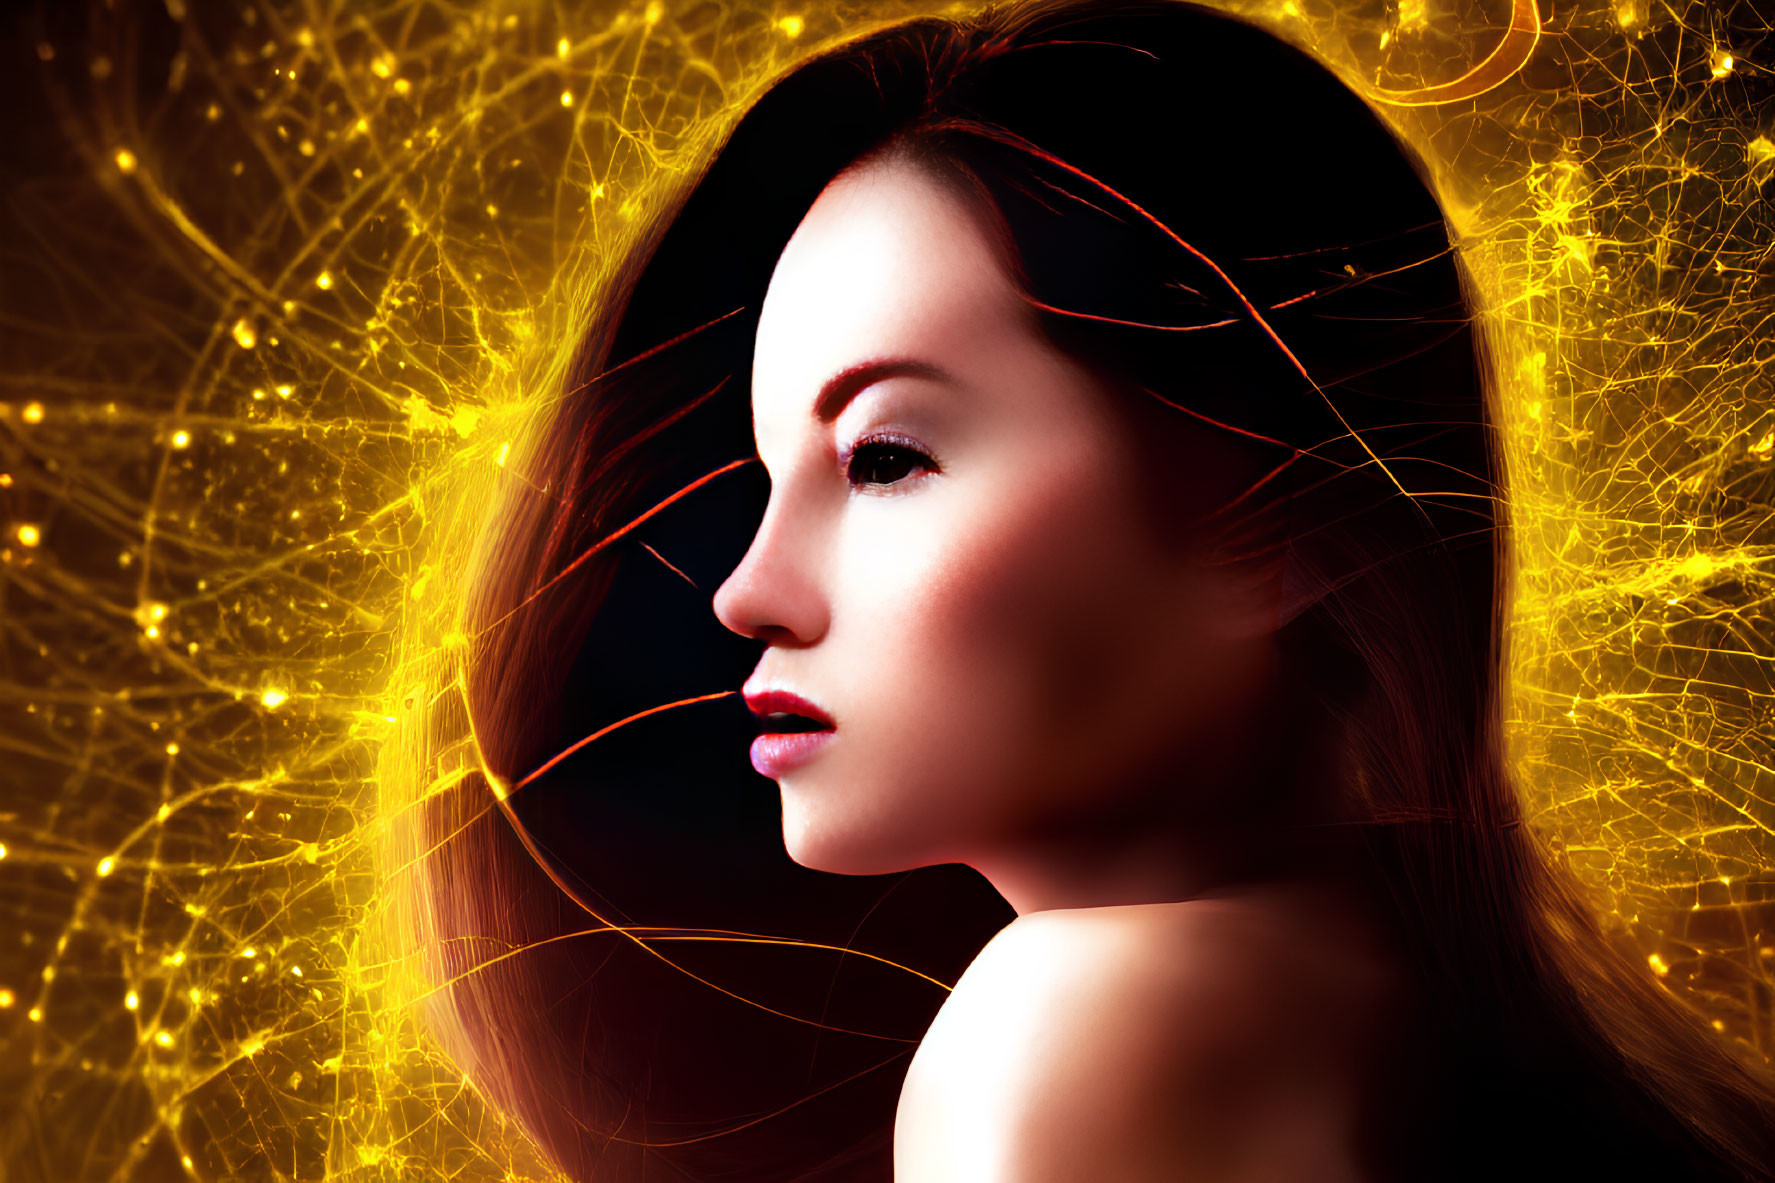 Woman's side profile with flowing hair on vivid golden backdrop.